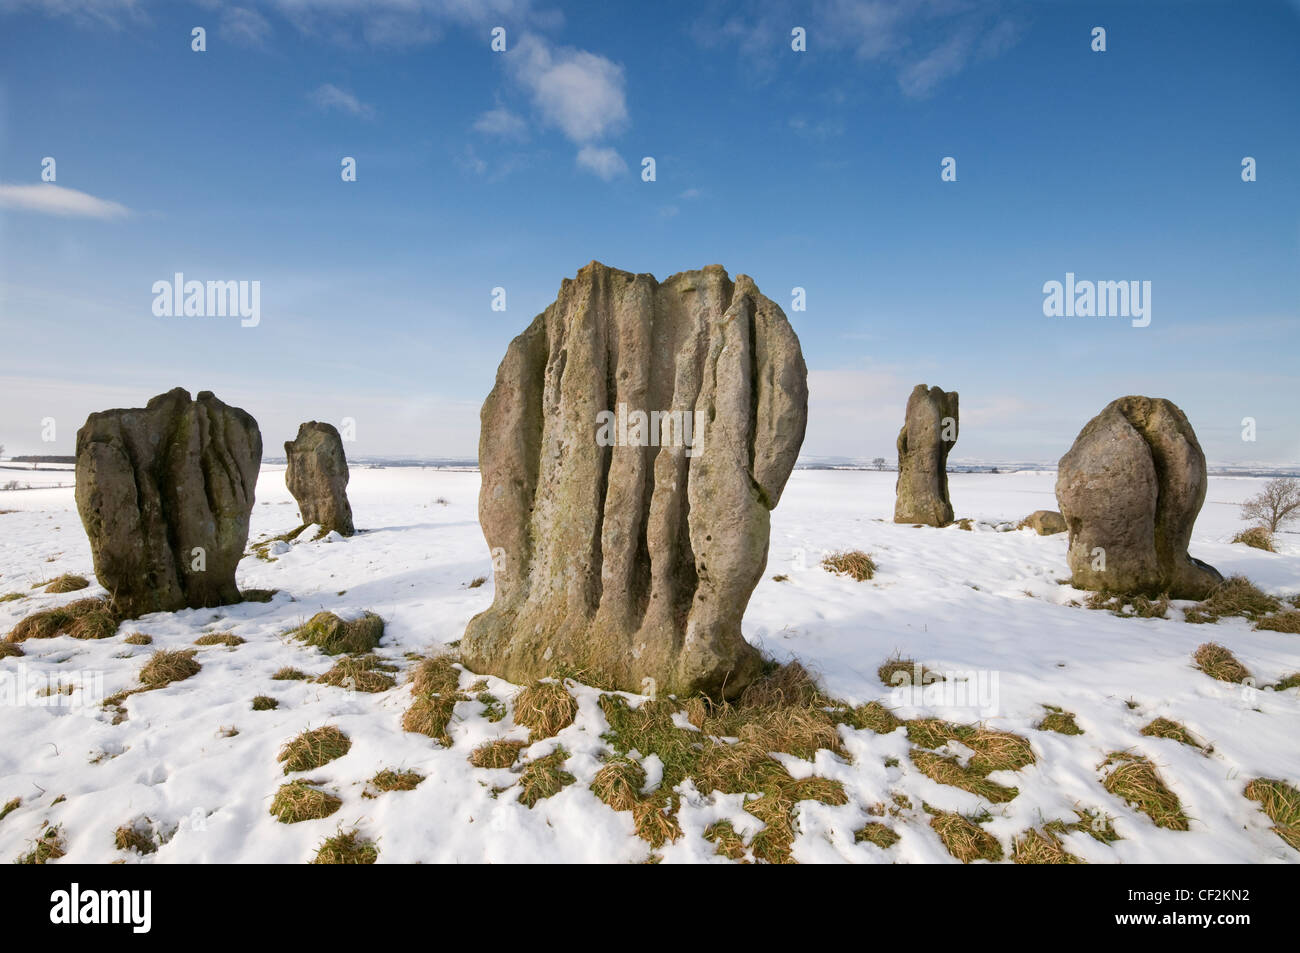 Duddo Four Stones (although there are actually five) a prehistoric stone circle on a snow covered hilltop in Northumberland. The Stock Photo